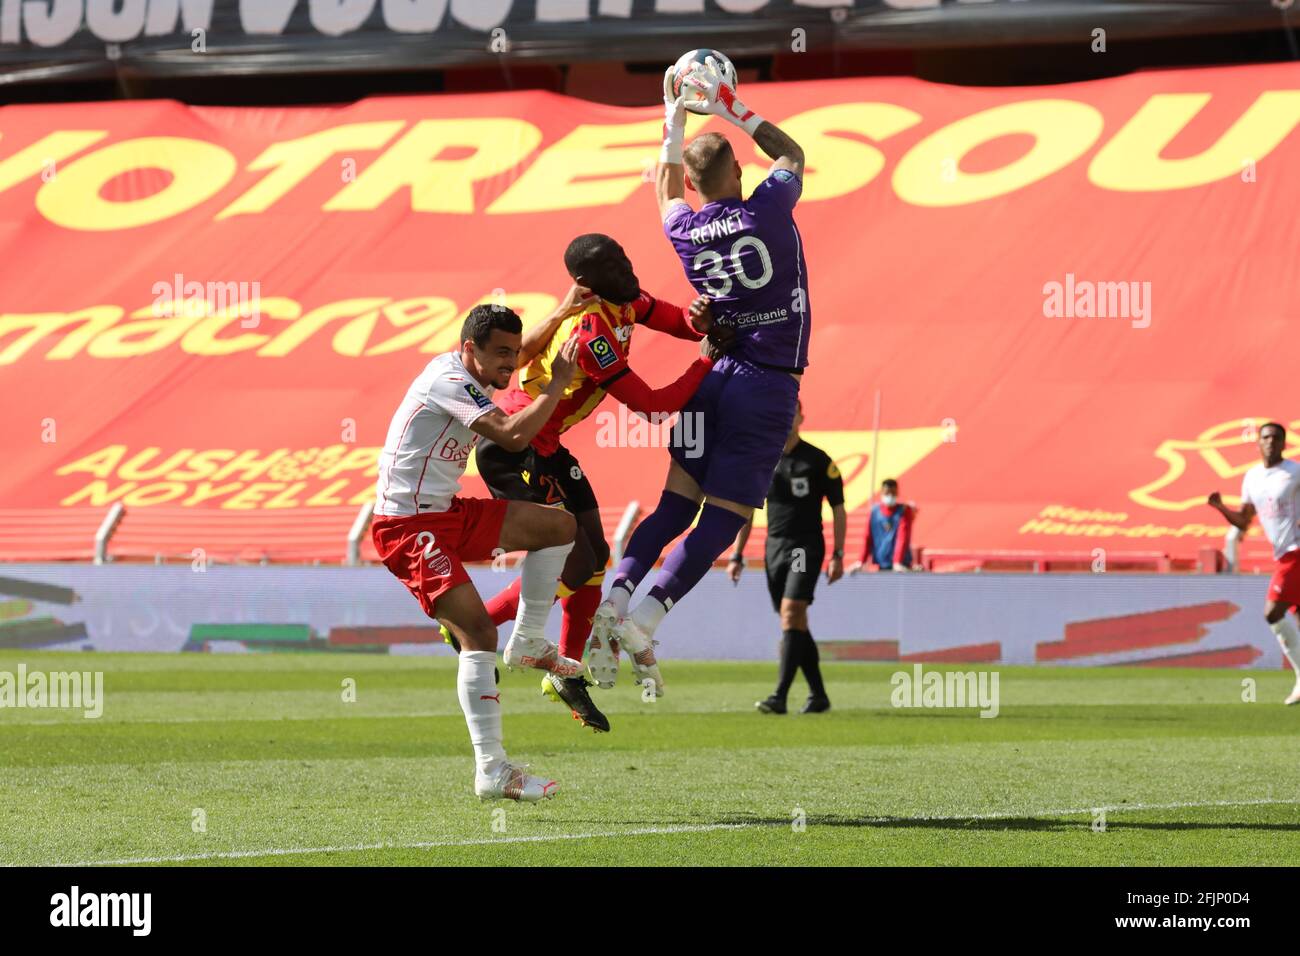 Baptiste Reynet goalkeeper Nimes during the French championship Ligue 1  football match between RC Lens and